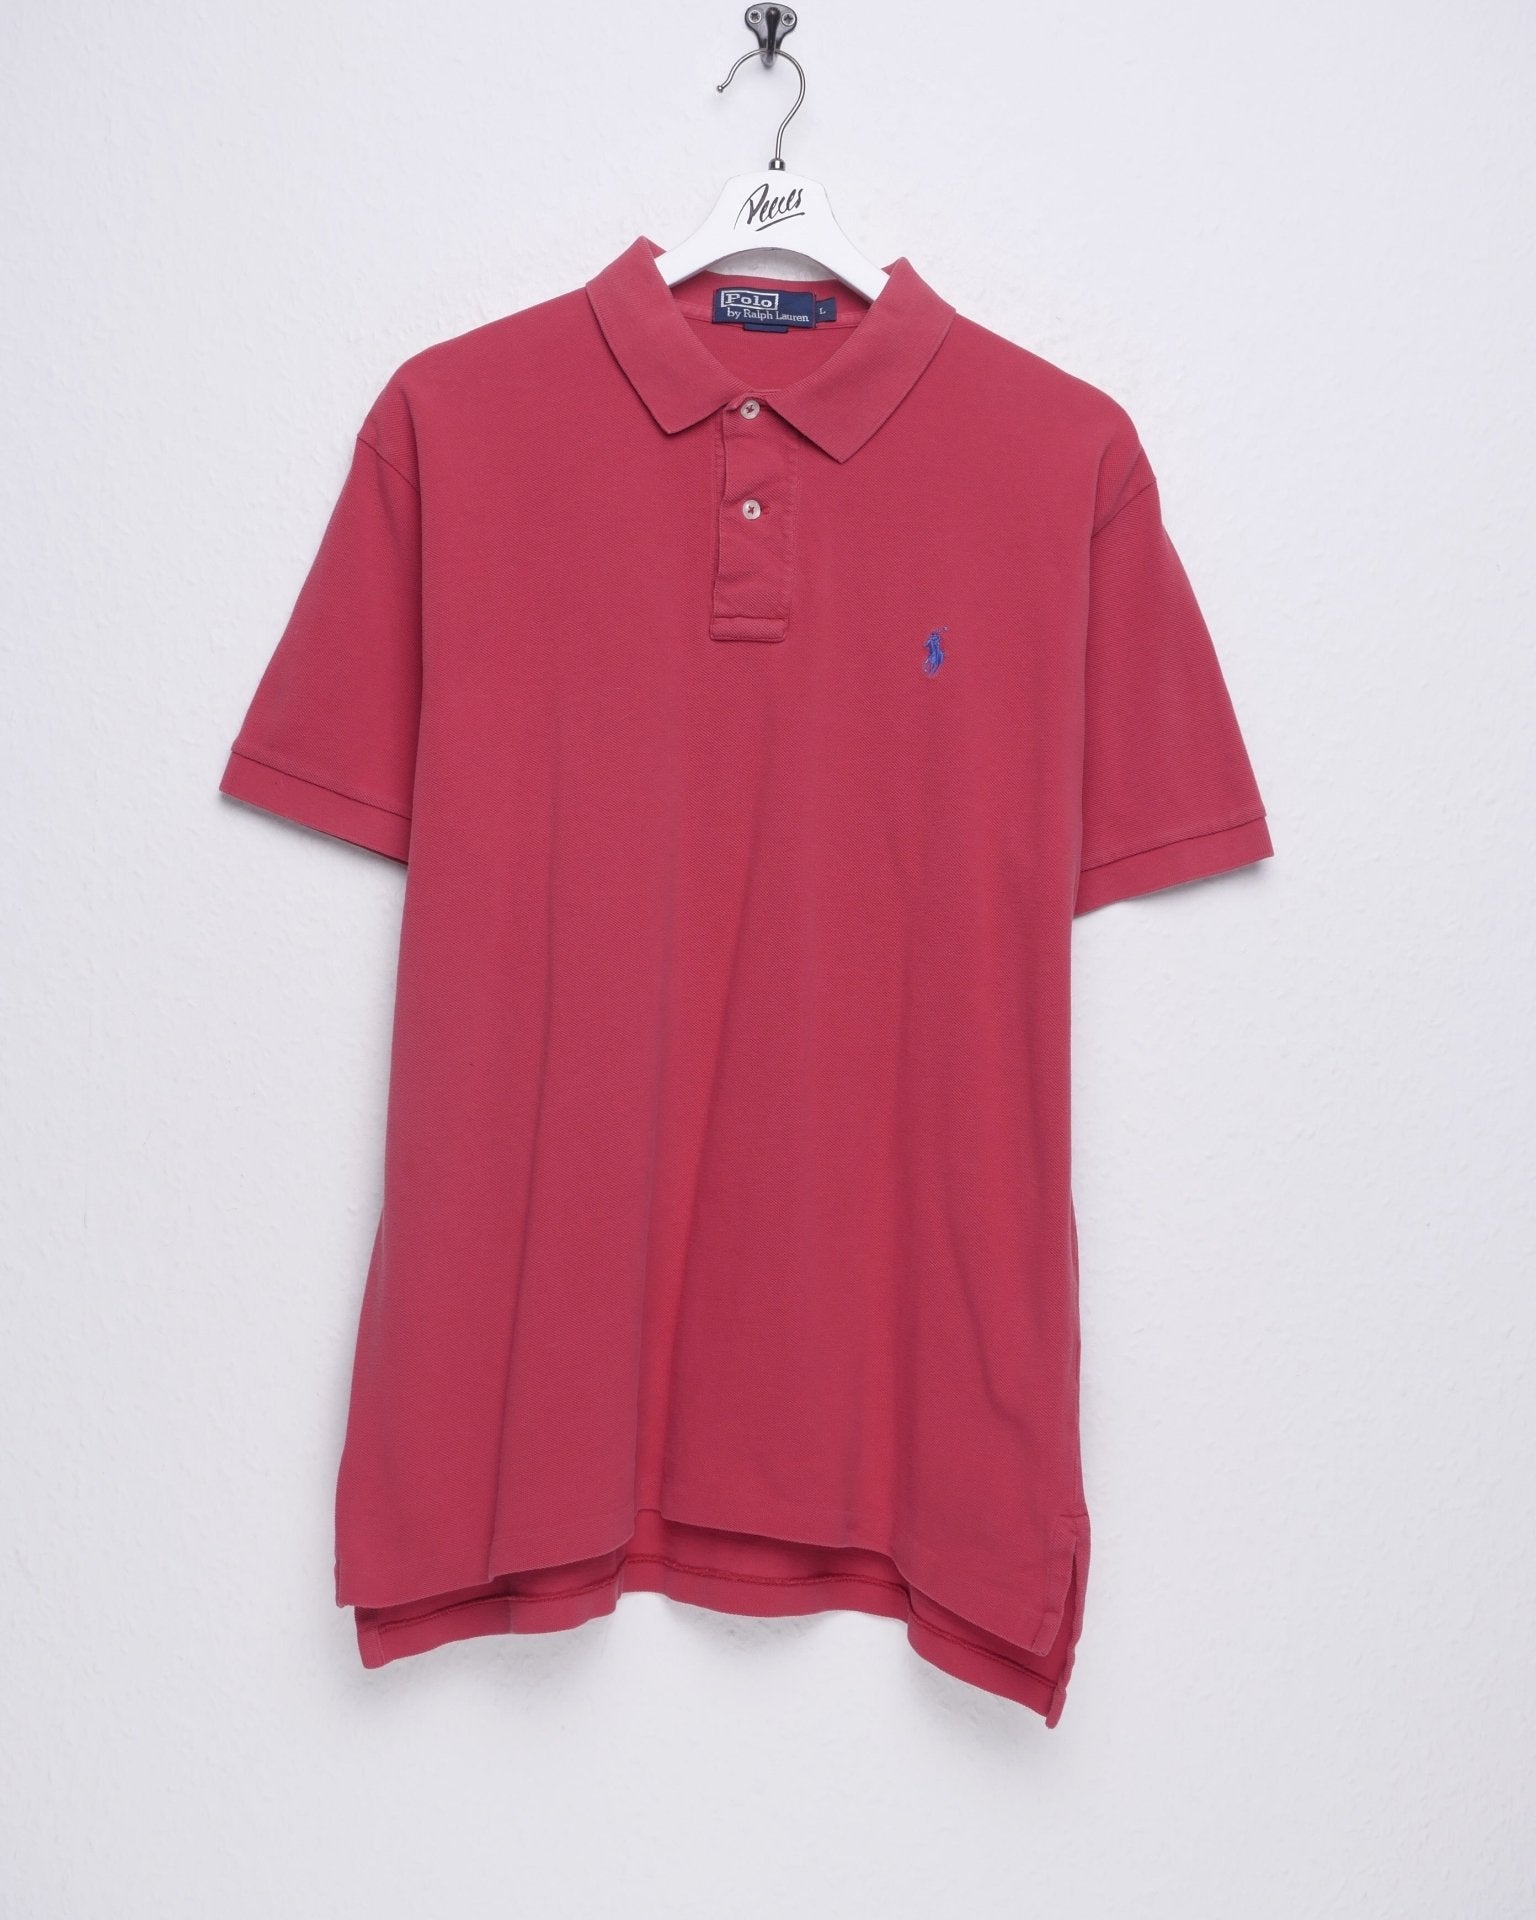 Polo Ralph Lauren embroidered blue Logo red S/S Polo Shirt - Peeces